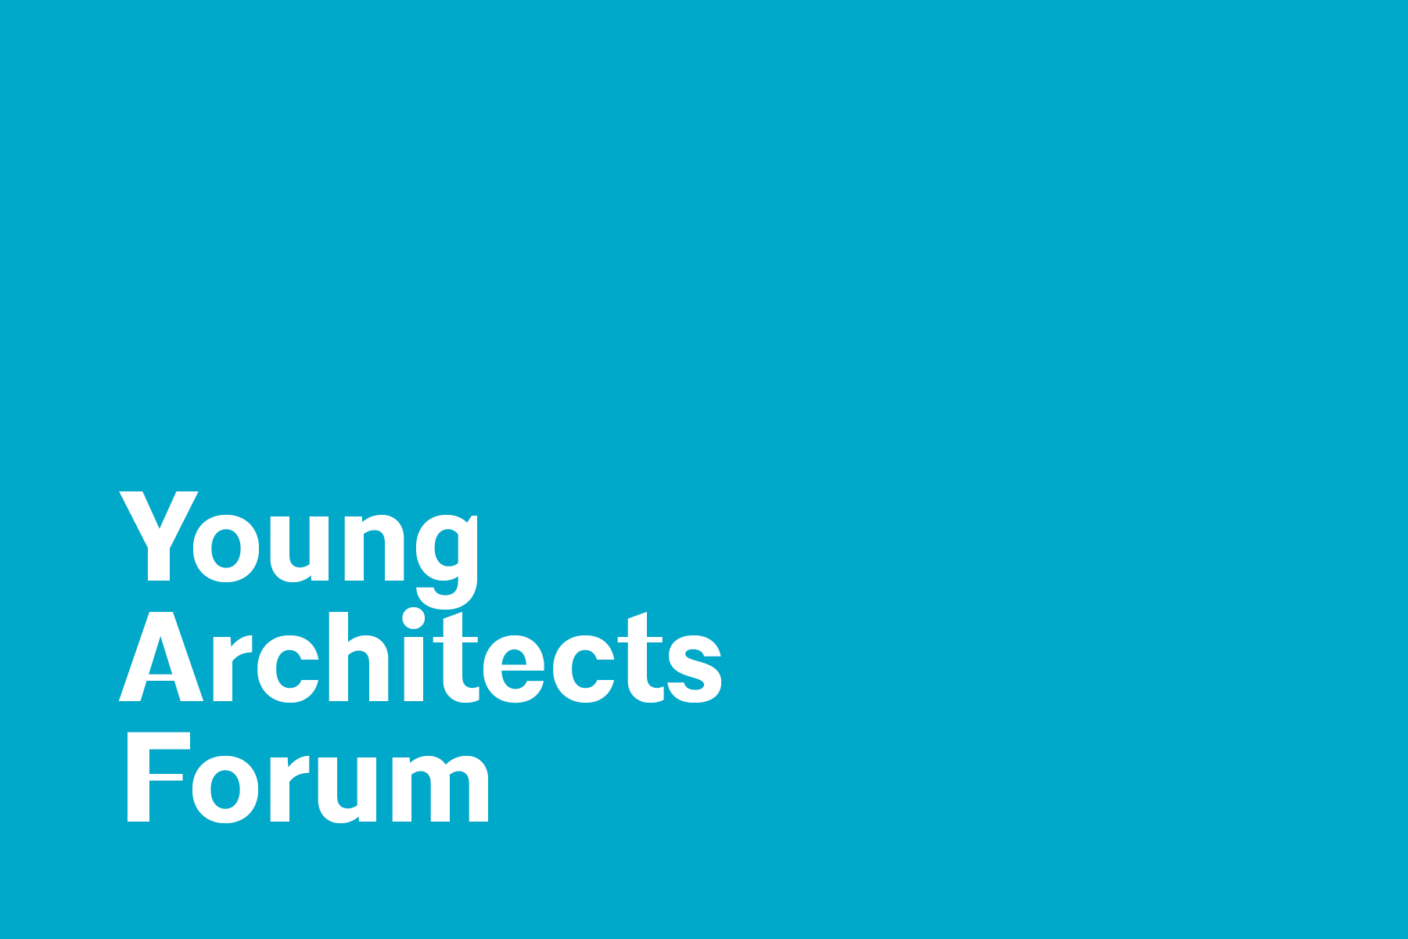 The Young Architects Forum (YAF) promotes the professional growth and leadership development of Emerging Professionals, including early and mid-career architects and unlicensed professionals on both traditional and non-traditional career paths.